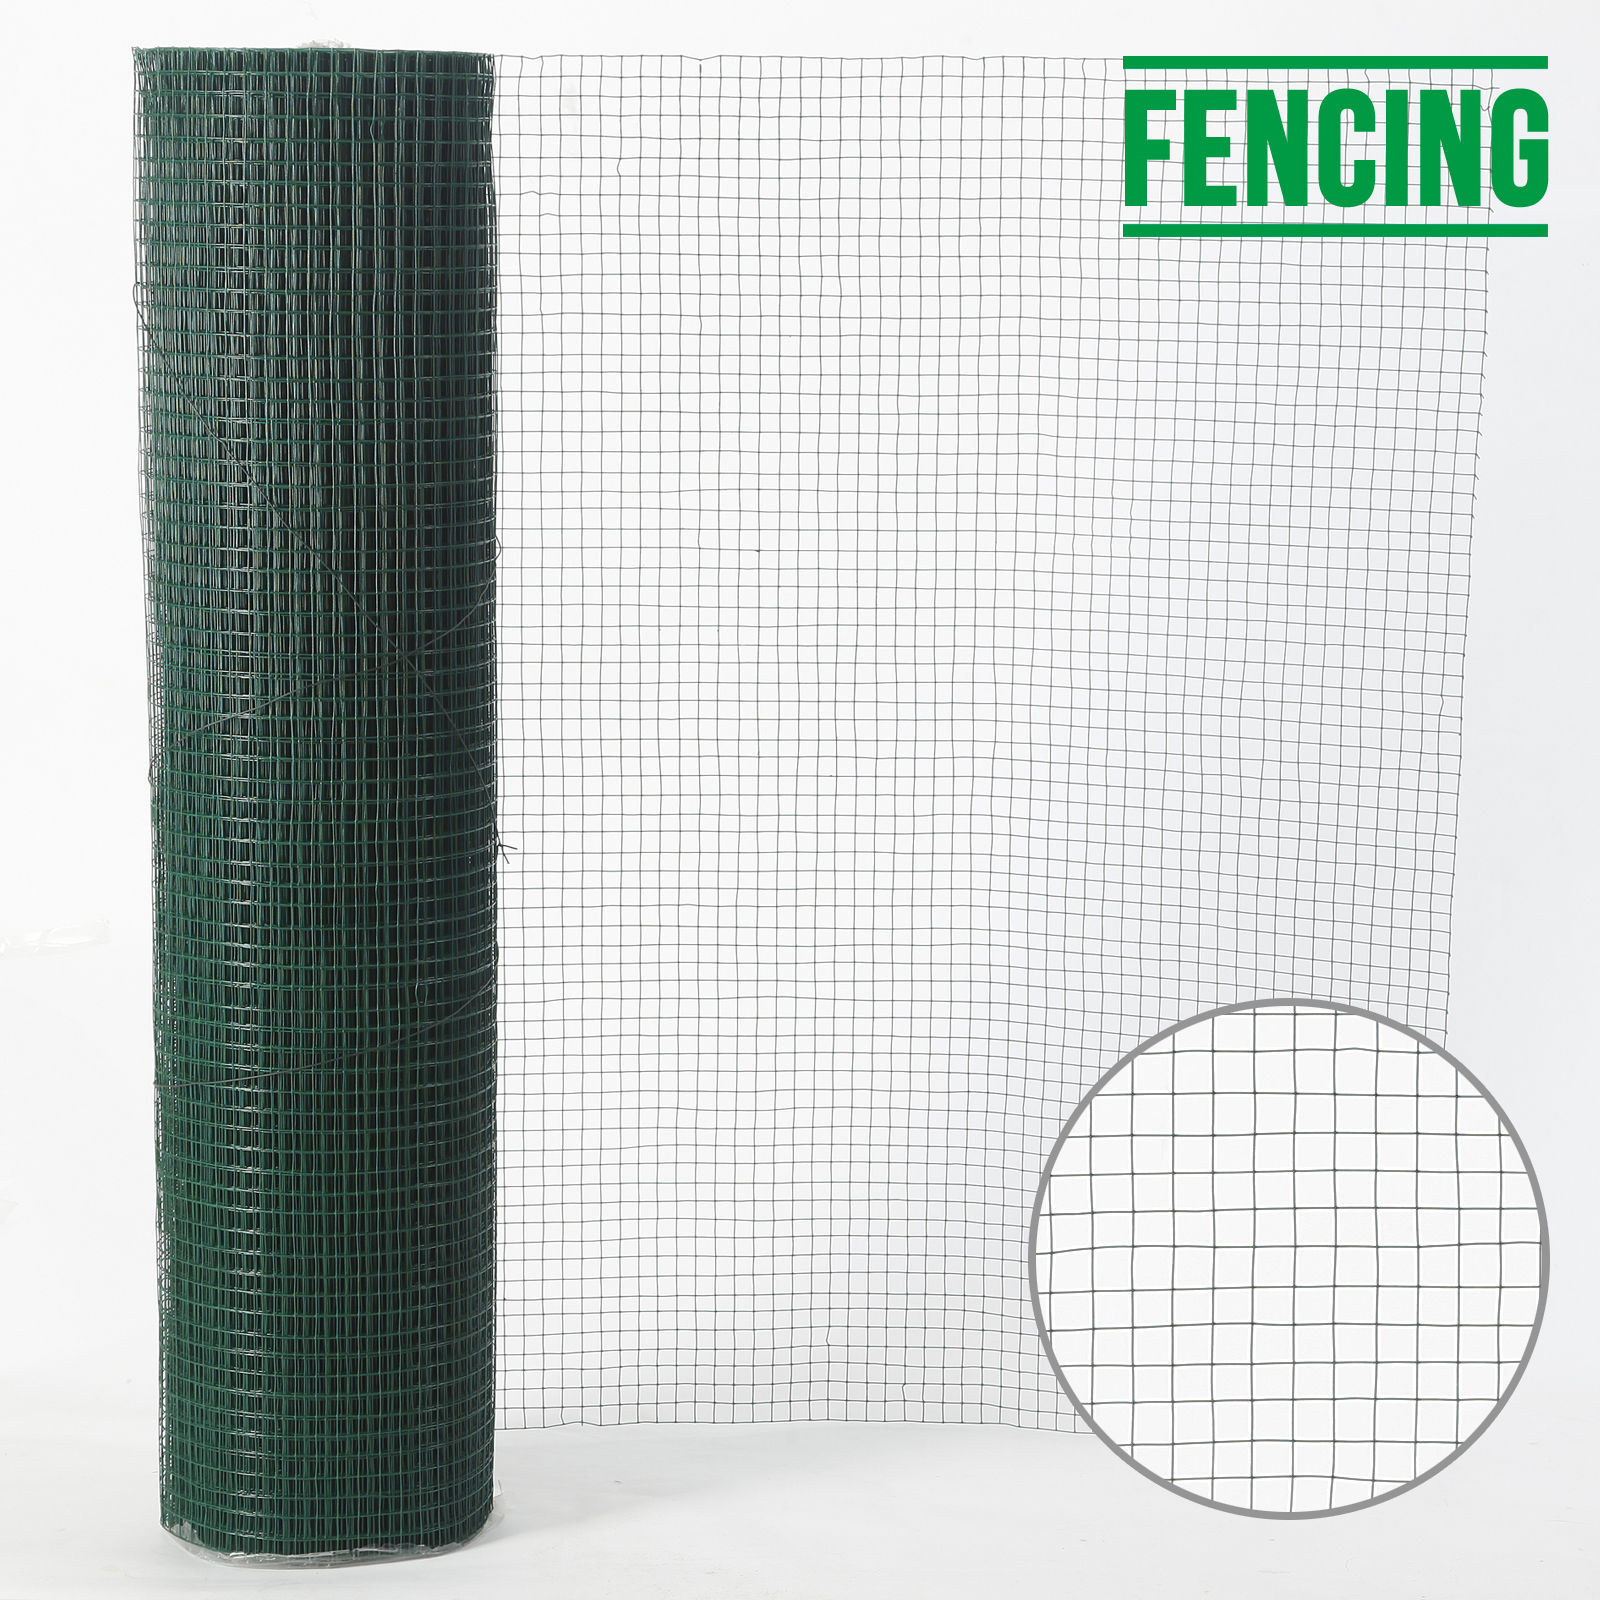 Details about Green PVC Coated Chicken Wire Mesh 30M Fencing Garden ...